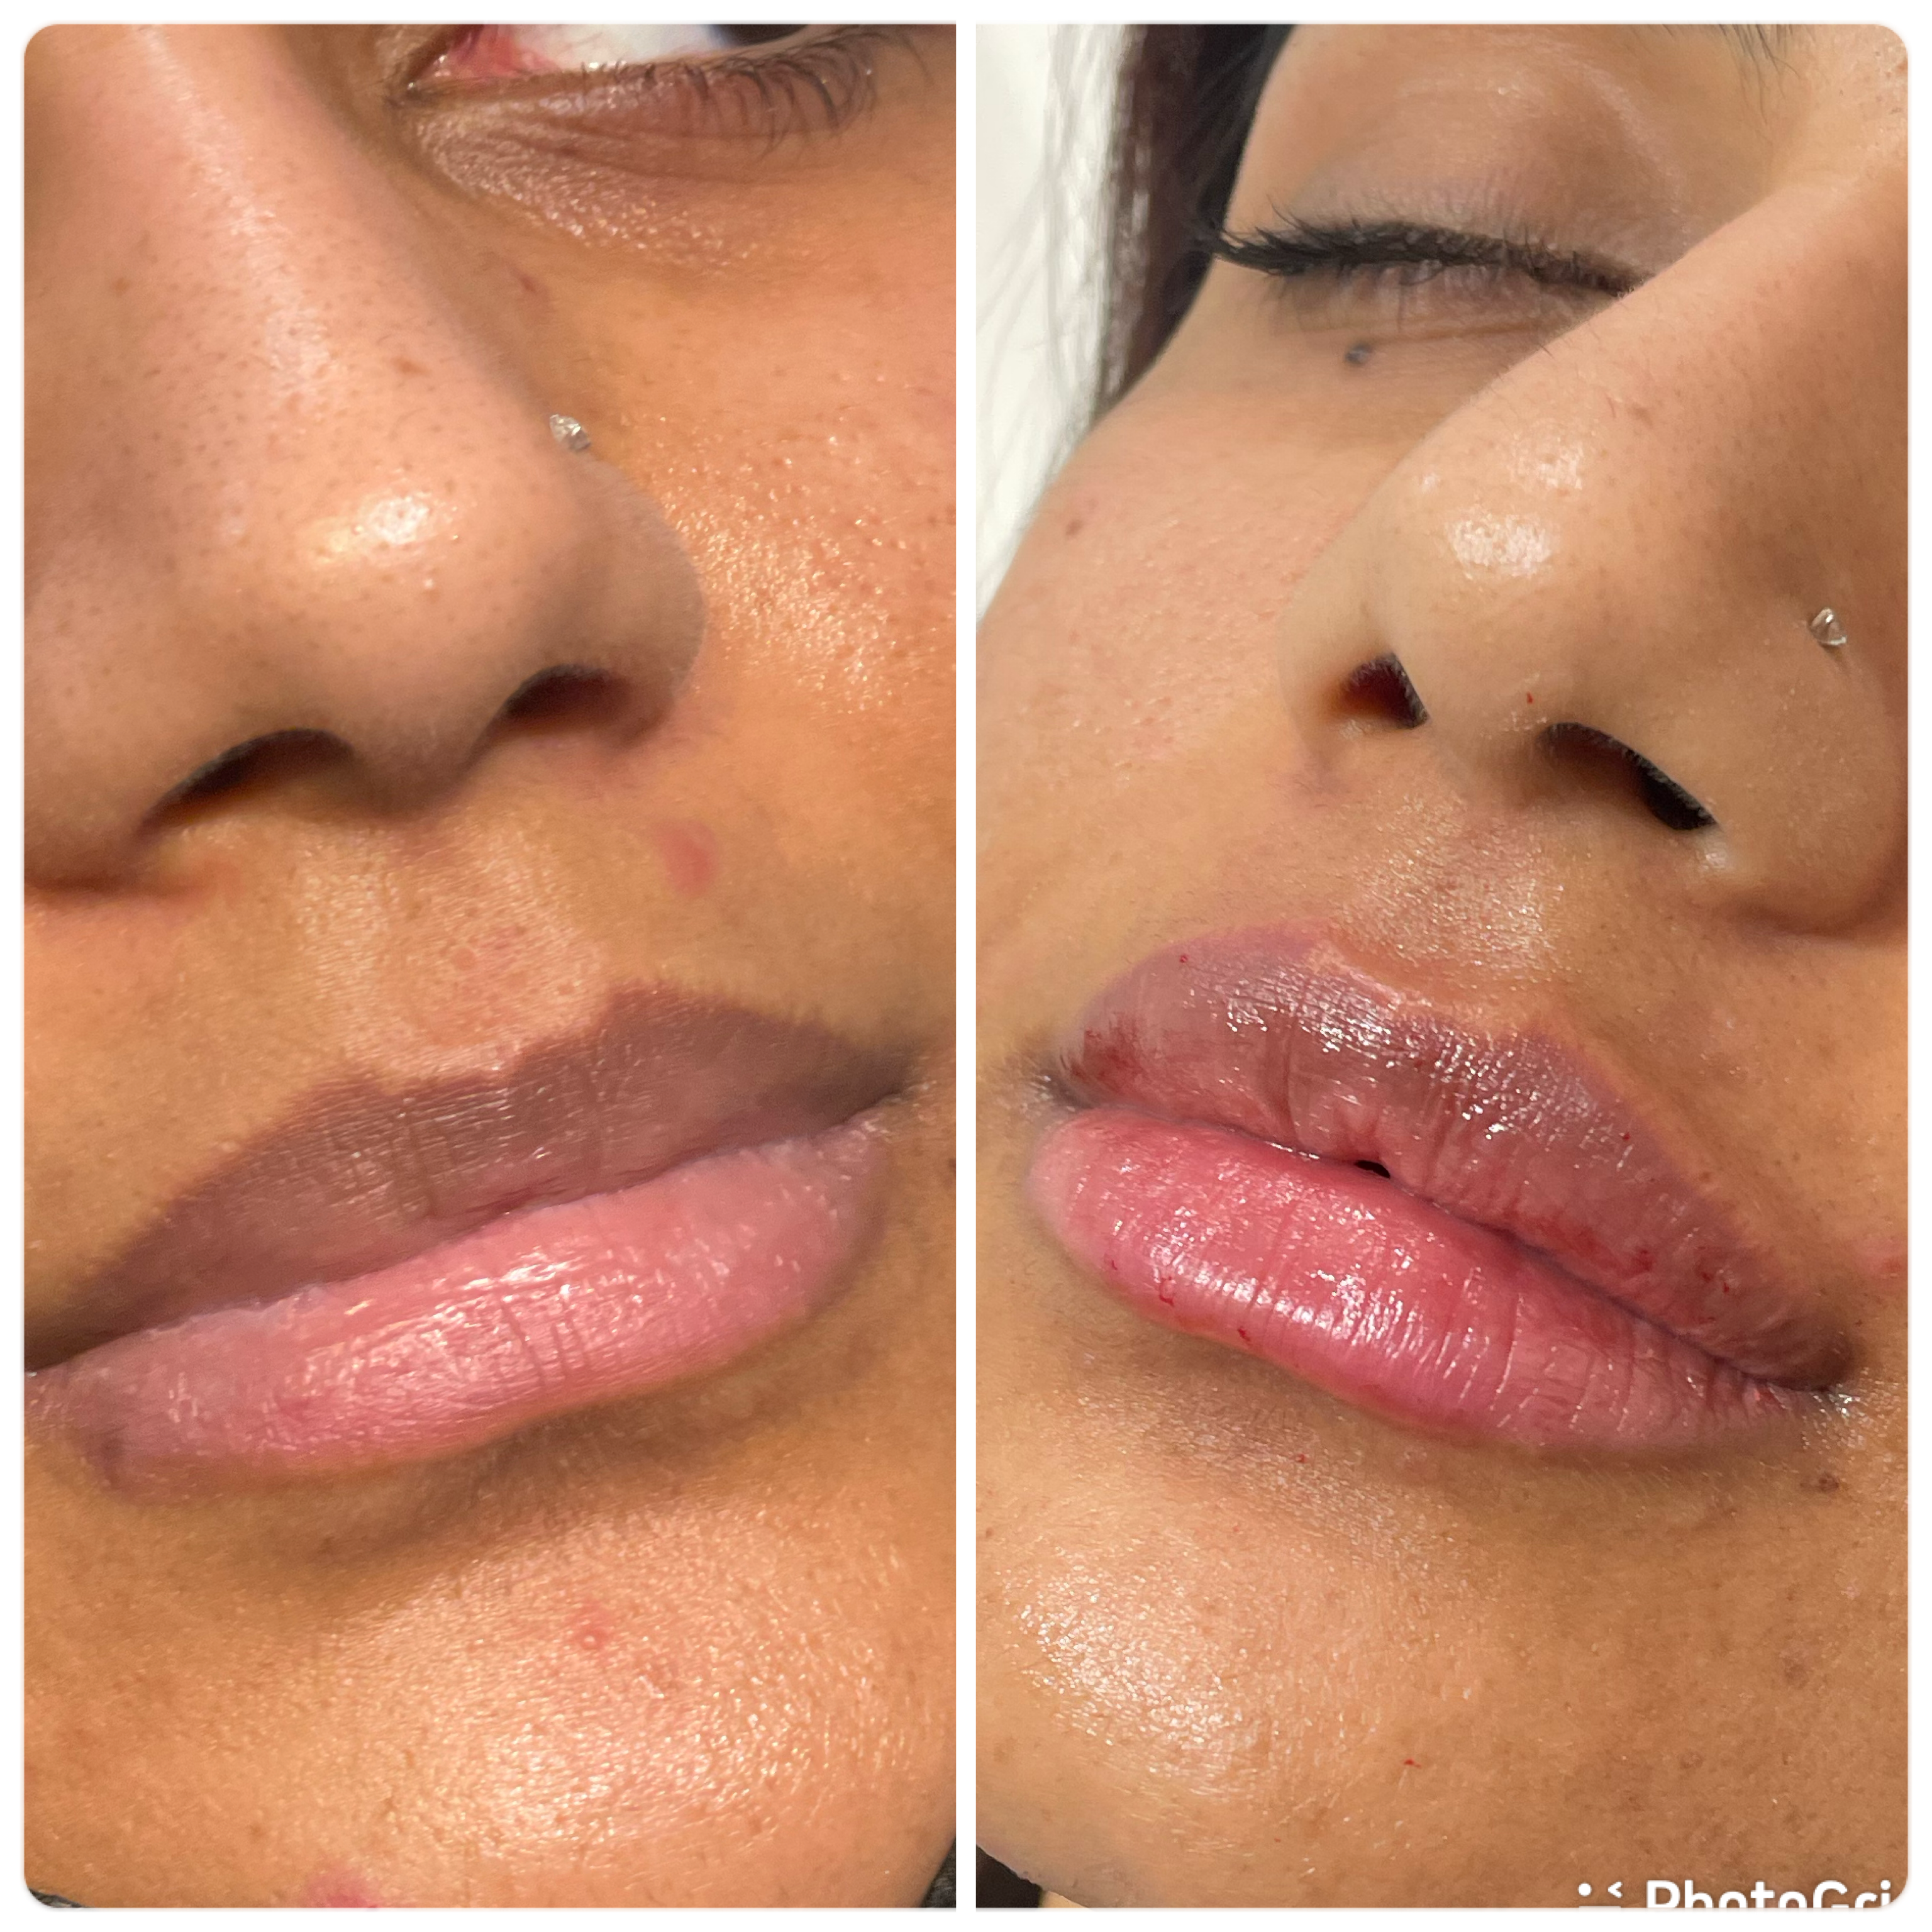 Not Every Lip Can Be Plump and Juicy After One Syringe